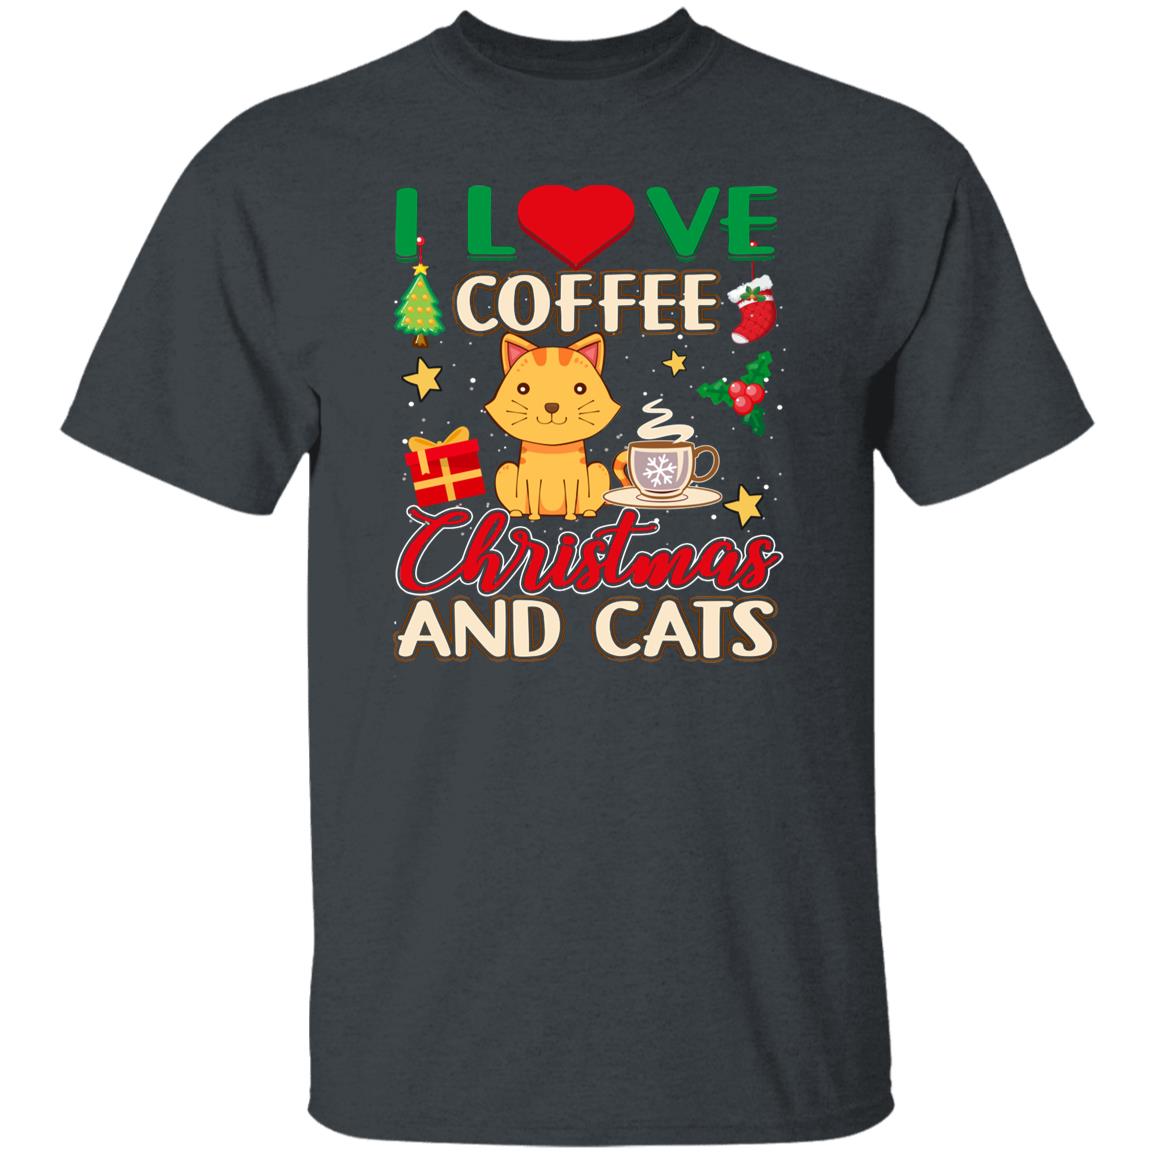 Coffee Christmas and Cats Unisex shirt cat Holiday tee Black Dark Heather-Family-Gift-Planet